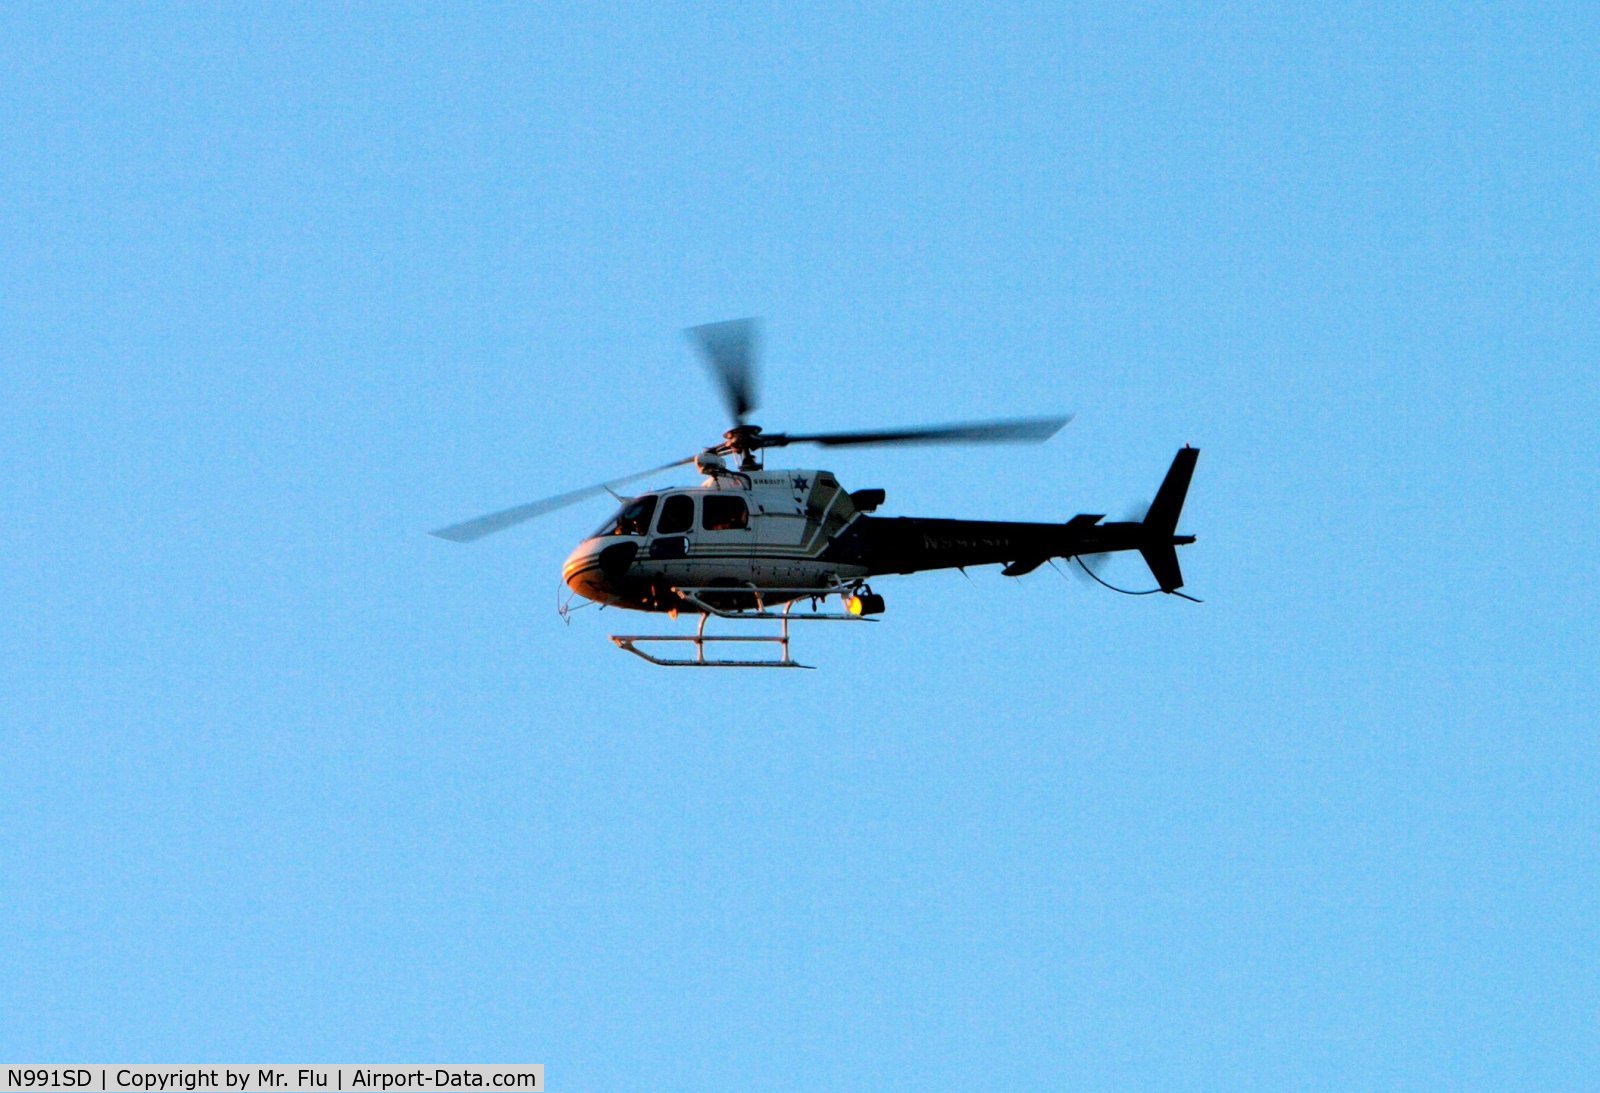 N991SD, Eurocopter AS-350B-3 Ecureuil Ecureuil C/N 3325, Picture mid-flight, likely looking for innocent marijuana growers